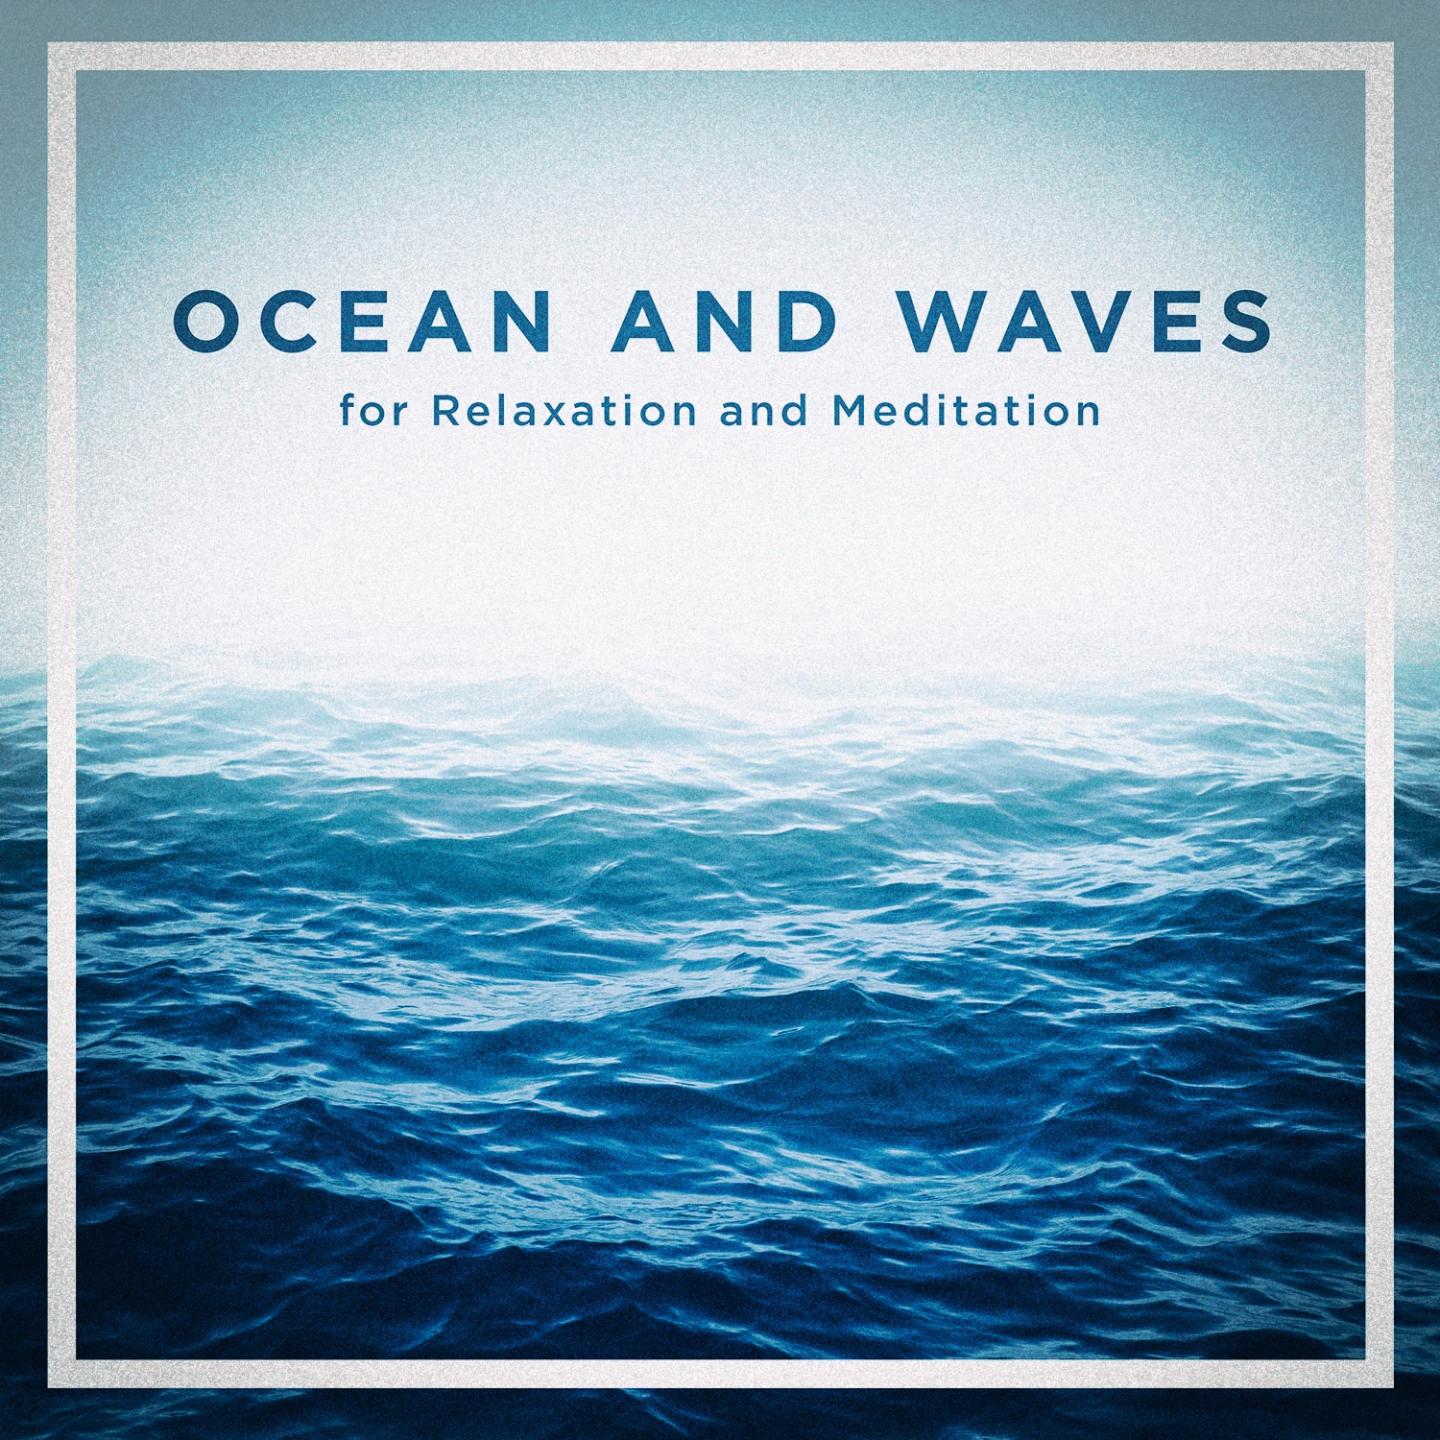 Ocean and Waves for Relaxation and Meditation